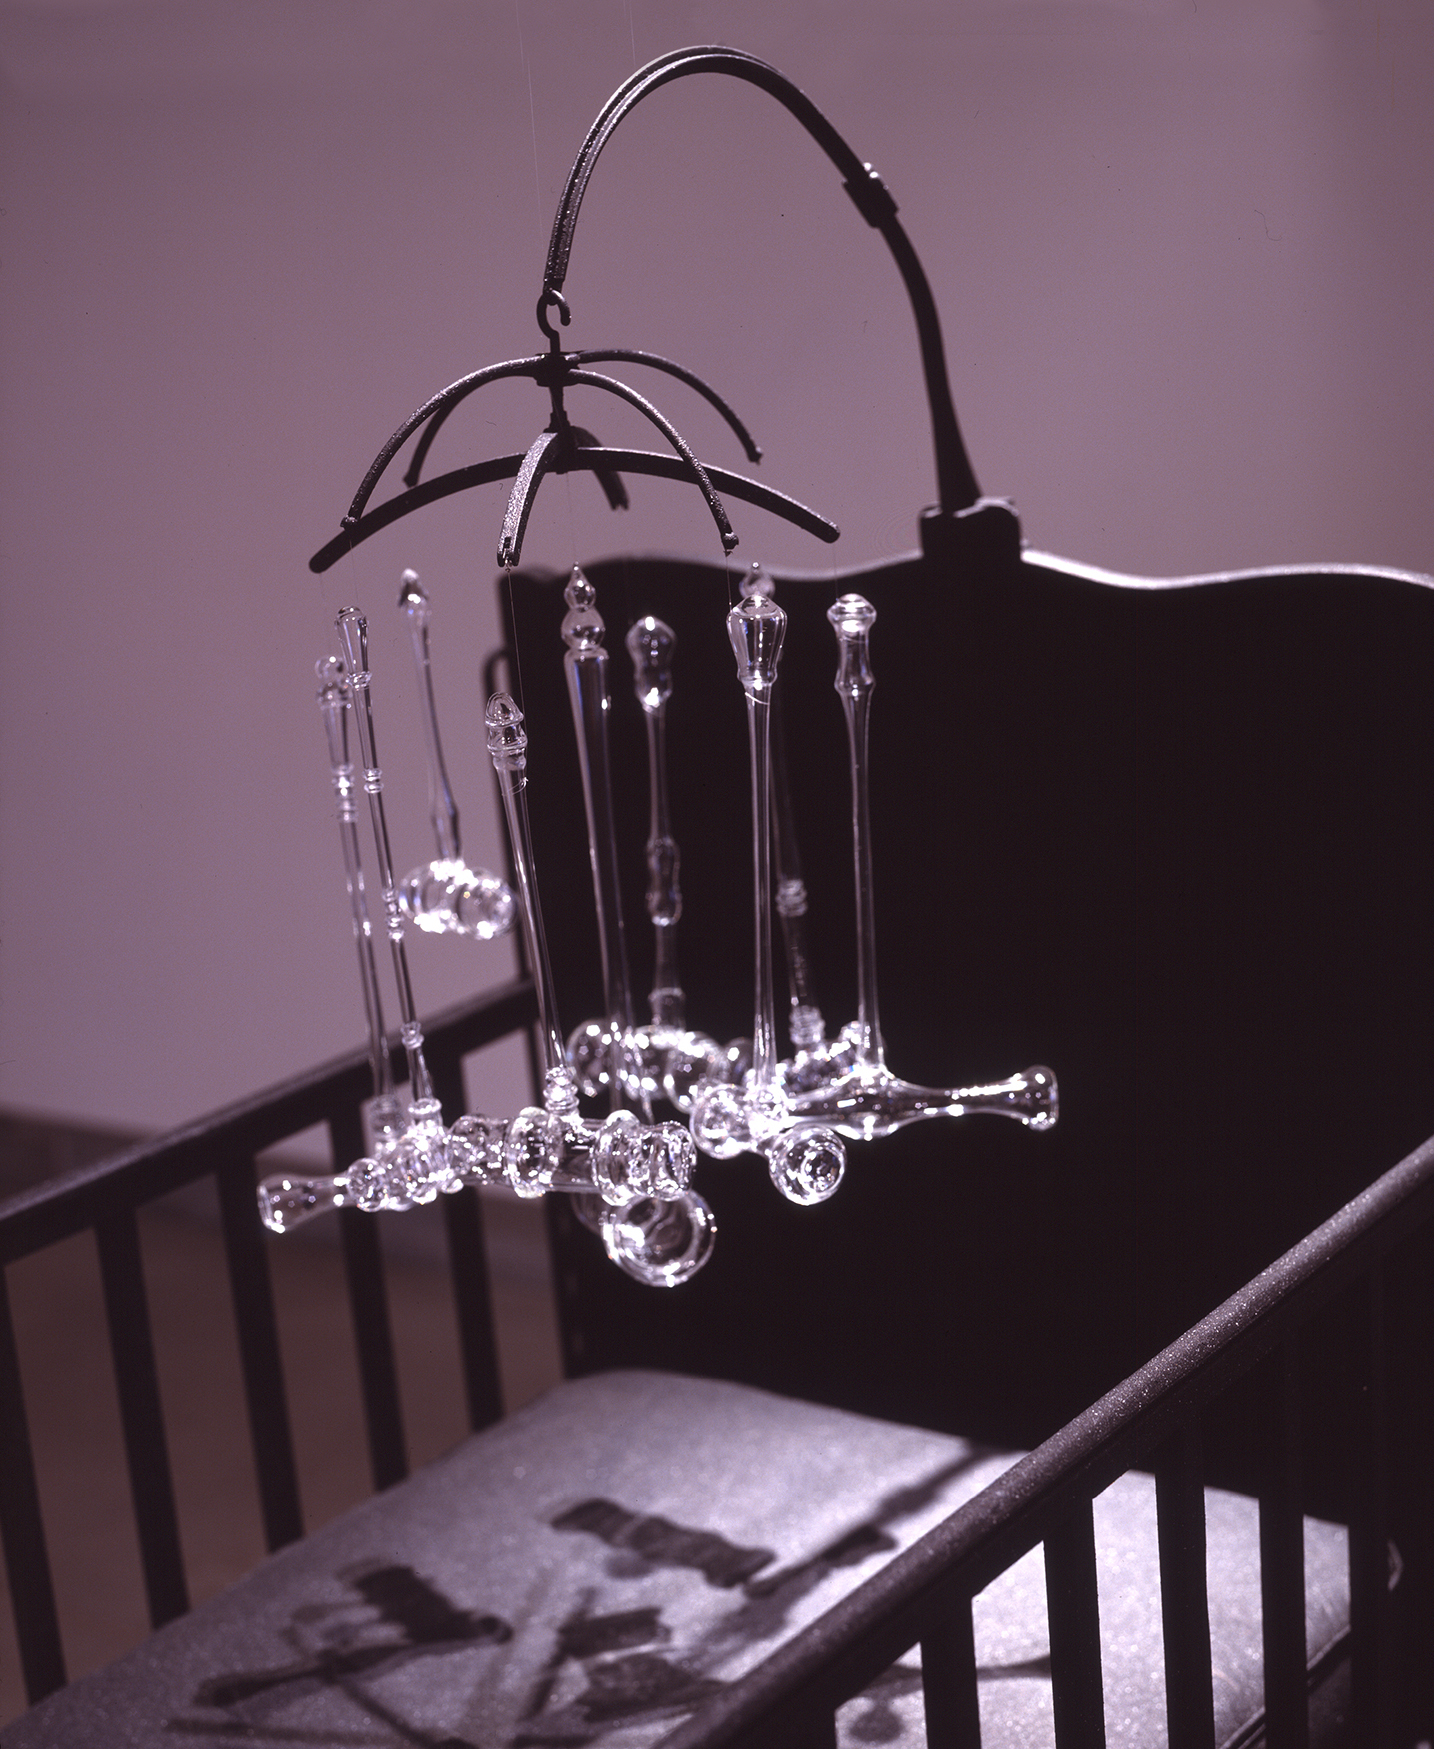 Detail of INFANT JUSTICE, 2002 crib with mobile consisting of nine glass gavels